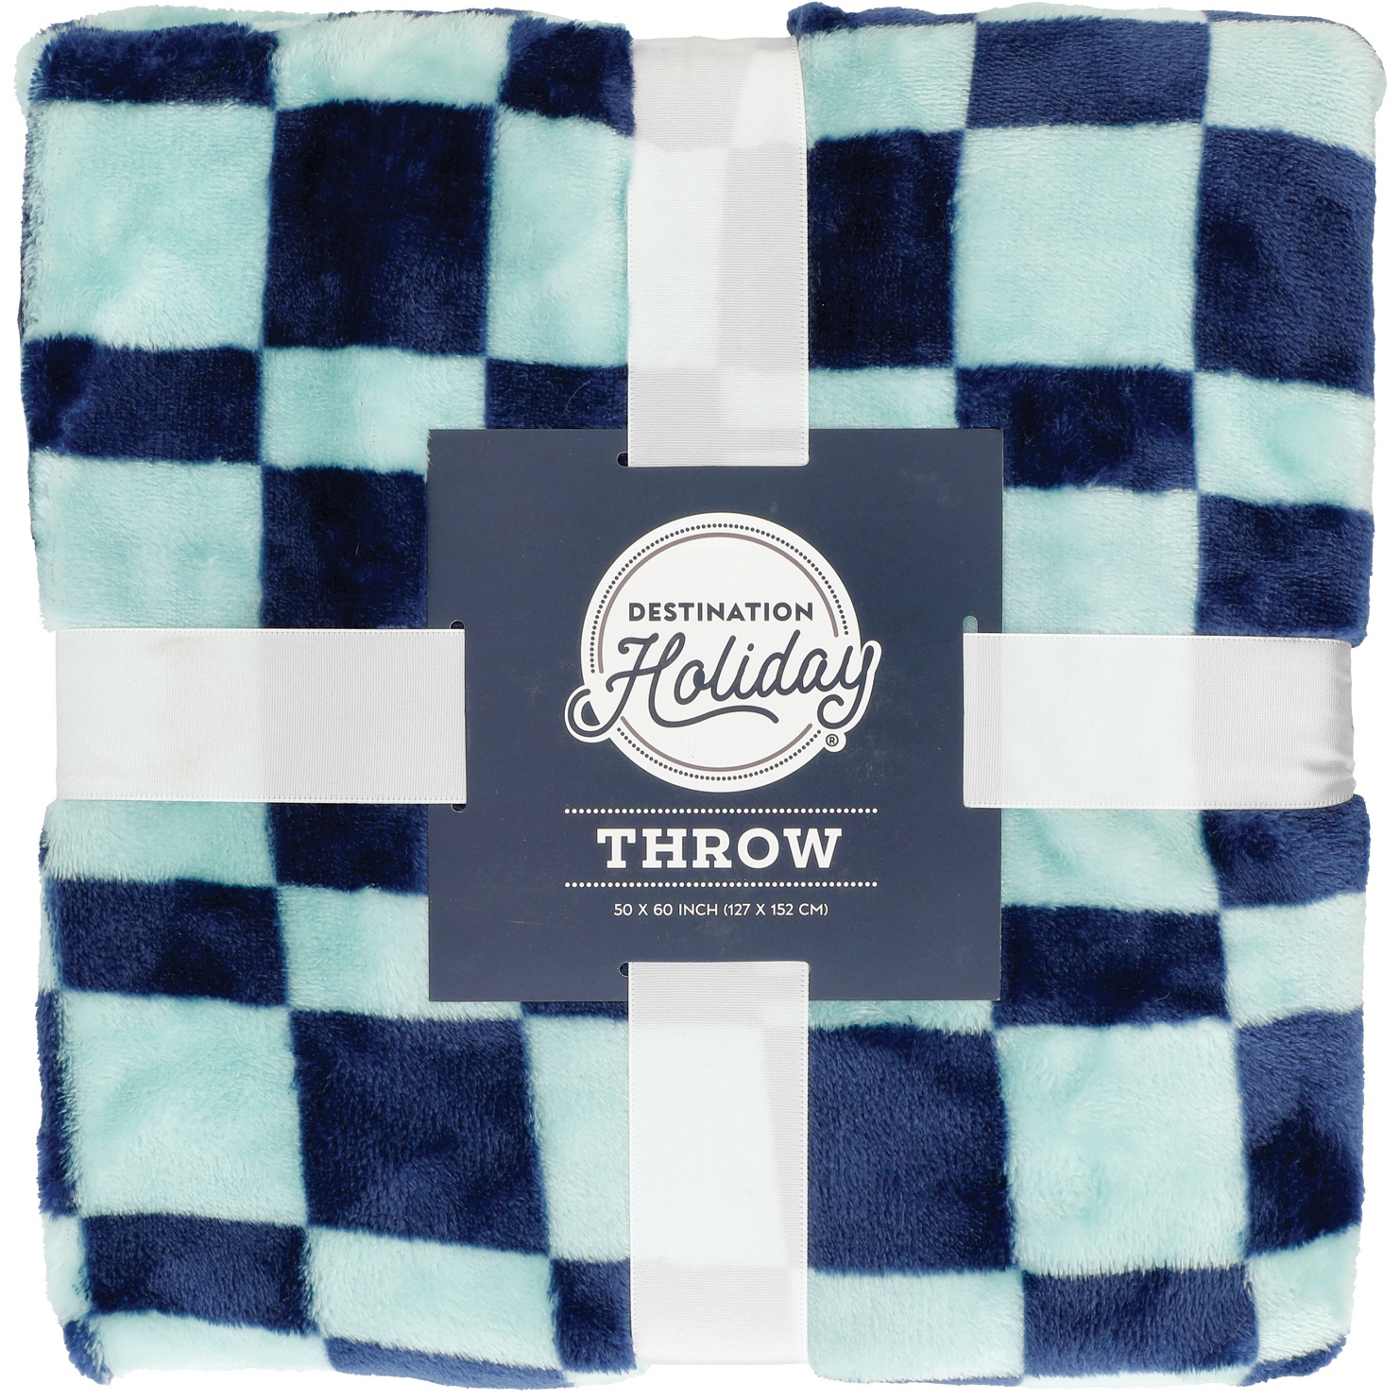 Destination Holiday Throw Blanket - Blue; image 1 of 2